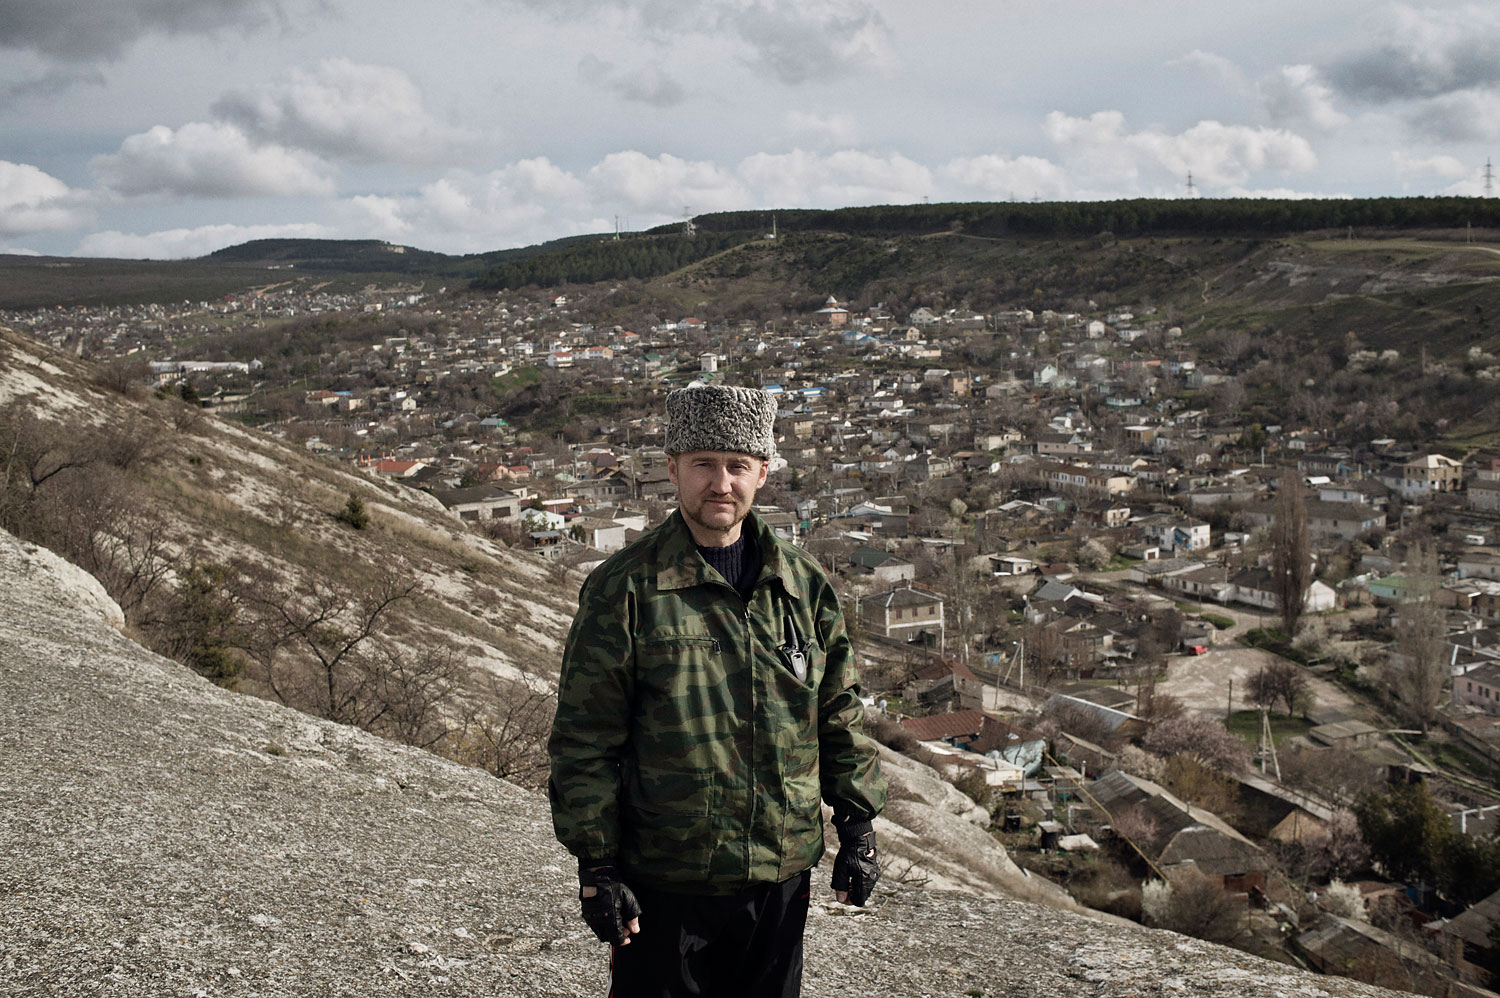 Sergei Yurchenko, the leader of a pro-Russian paramilitary force in Crimea, stands at a lookout point over his hometown Bakhchysarai, on March 16, 2014.